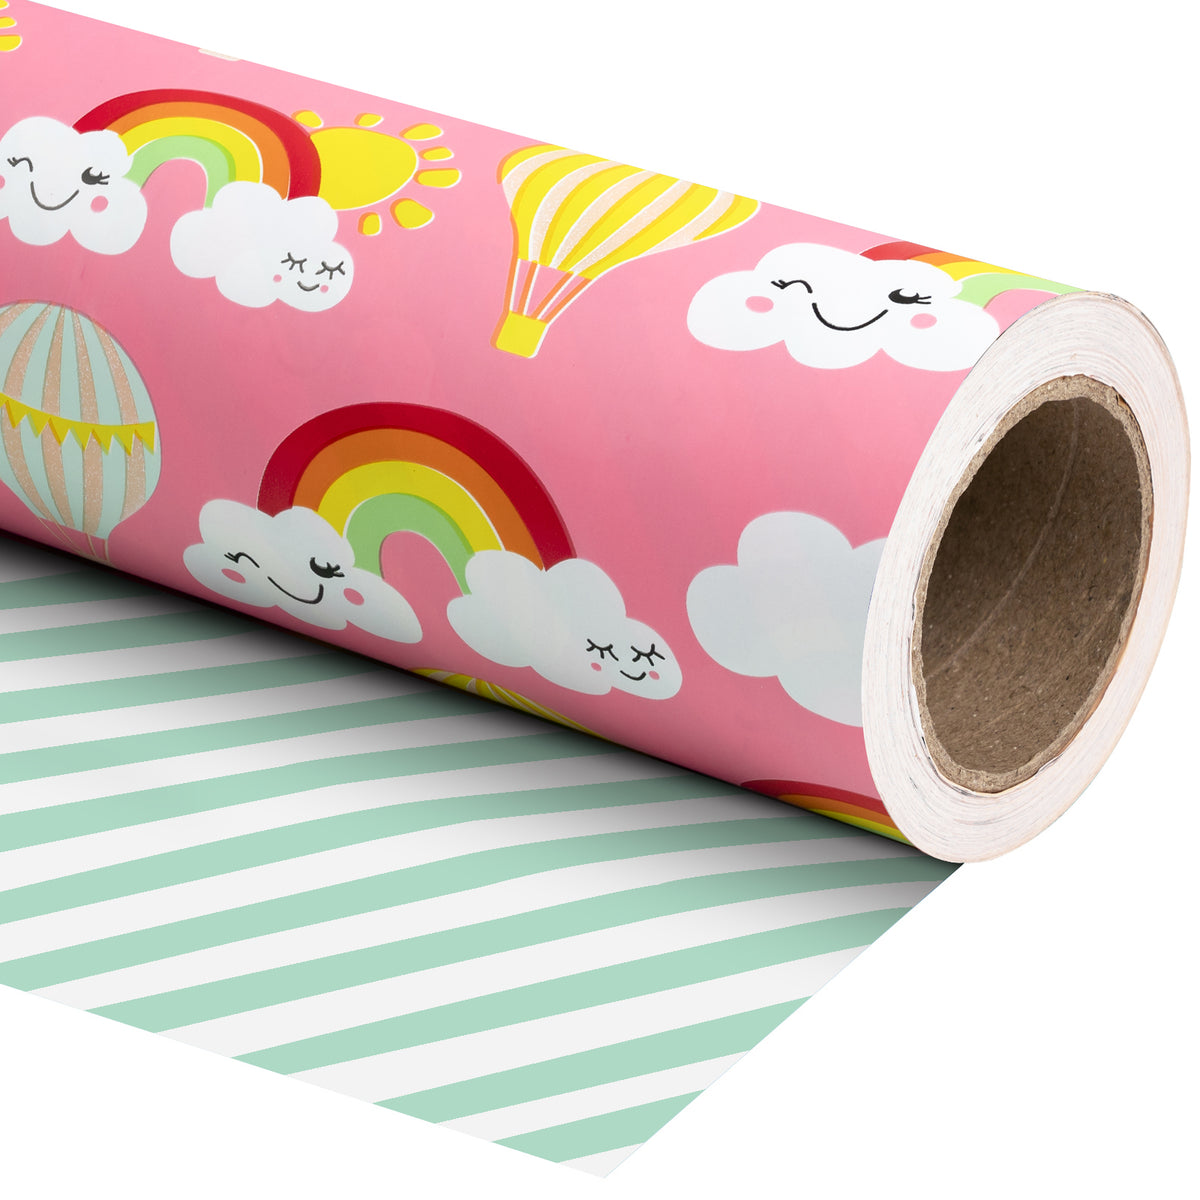 Wrapping Paper Roll, Kids Wrapping Paper Roll, Wrapping Paper Roll, 6PCS  Colorful Wrapping Paper, Birthday and Festival Wrapping Paper Gift Wrapping  50cm x 70cm(Fold delivery)